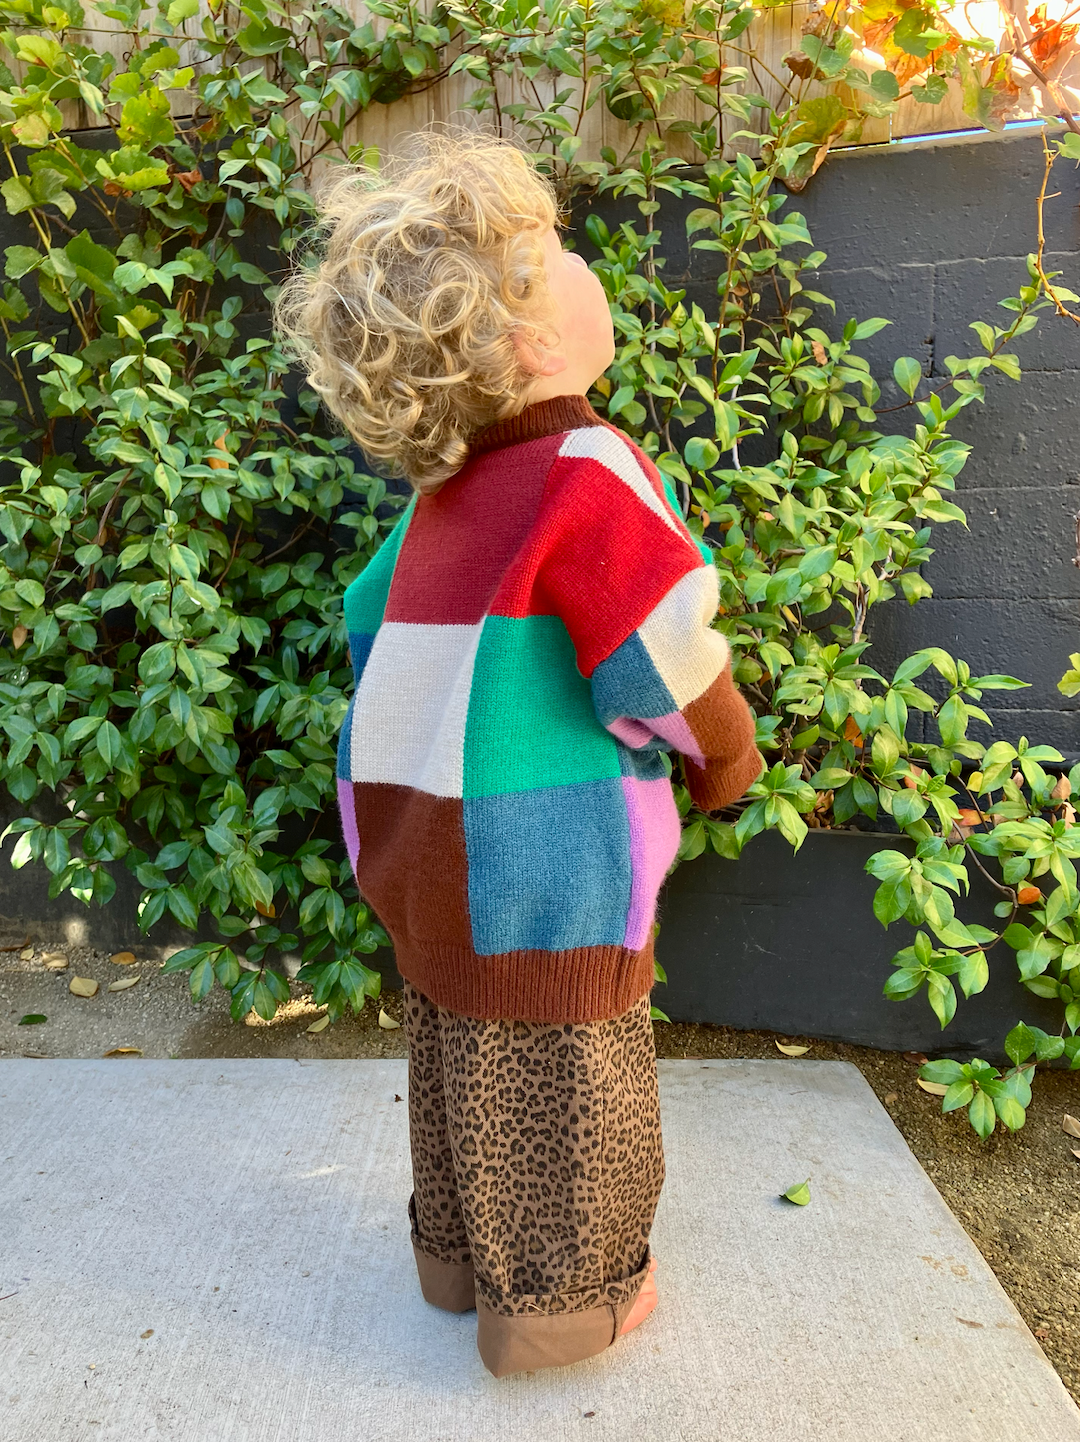 A toddler wearing a kids' colorblock sweater in shades of blue, green, brown, red, pink and cream